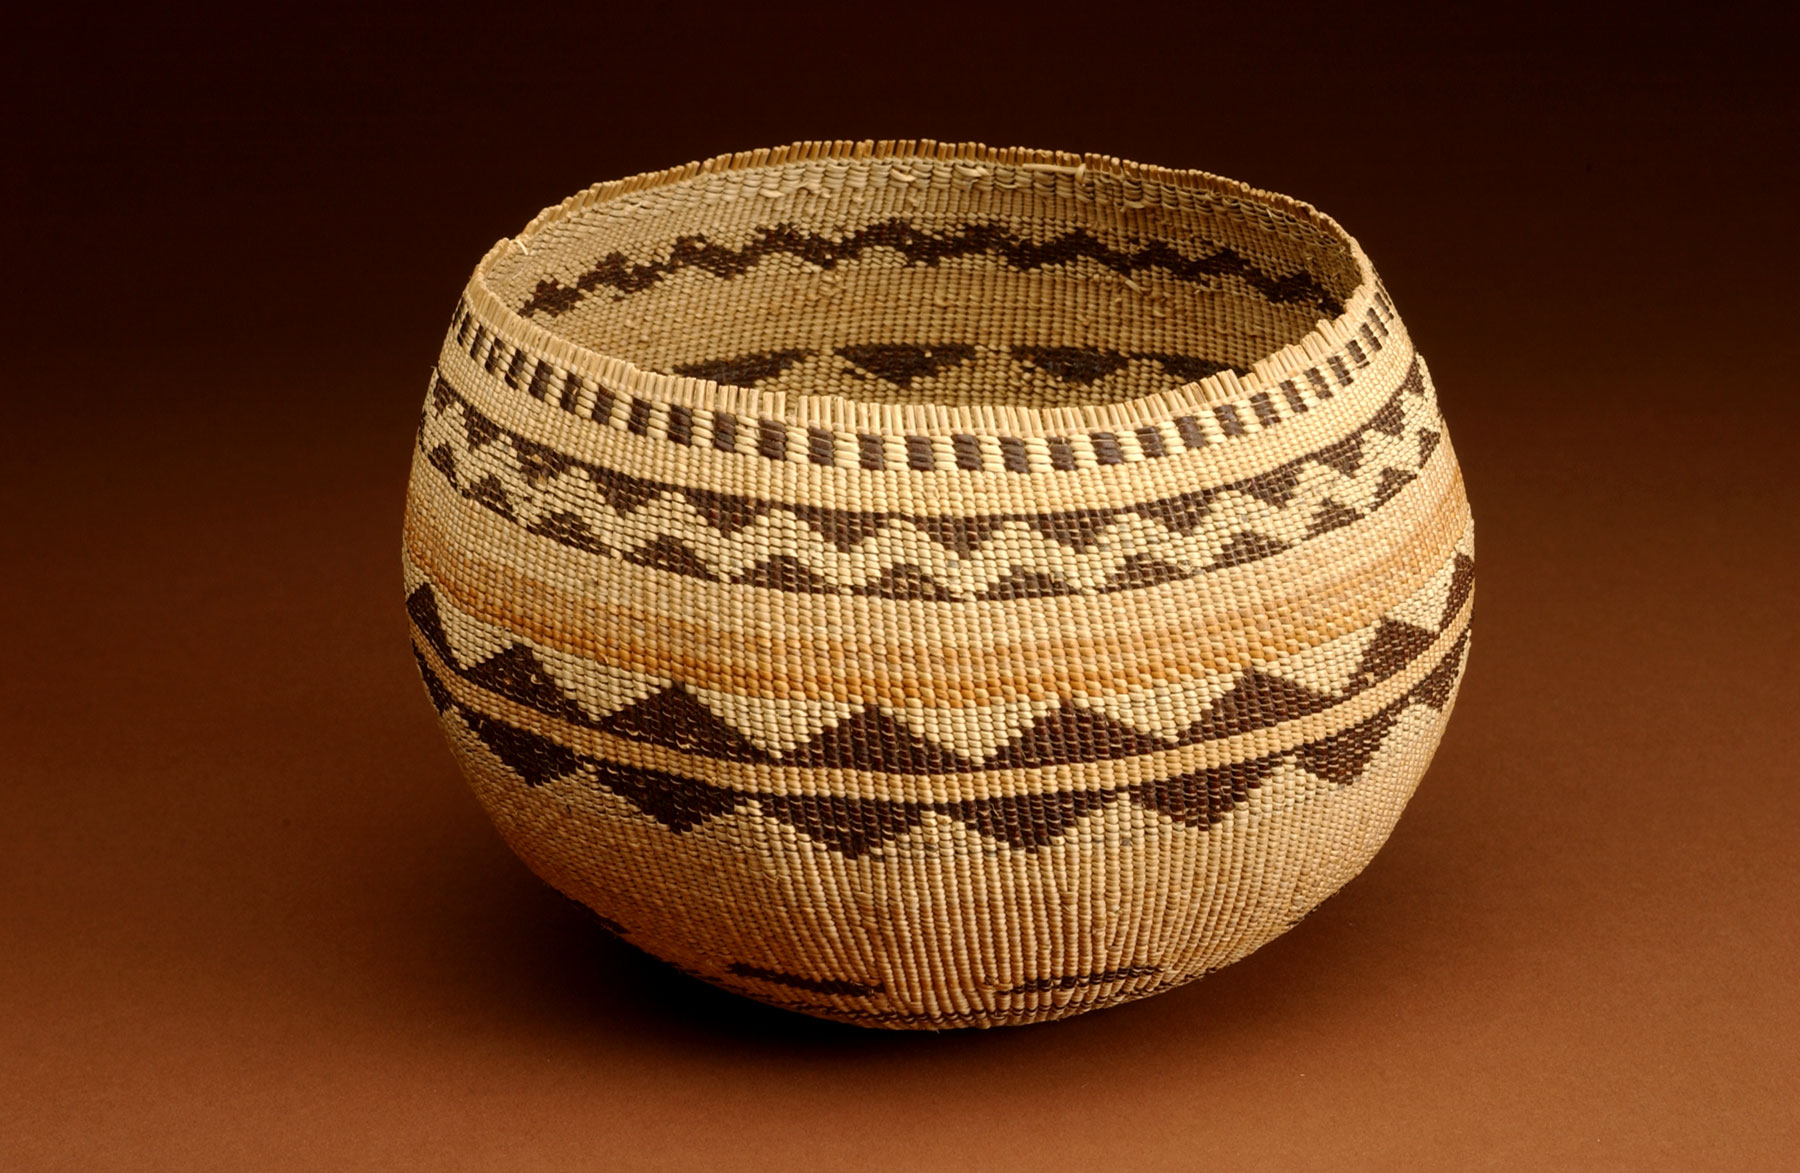 Pomo plain-twined cooking basket in the collection of the Grace Hudson Museum, Ukiah